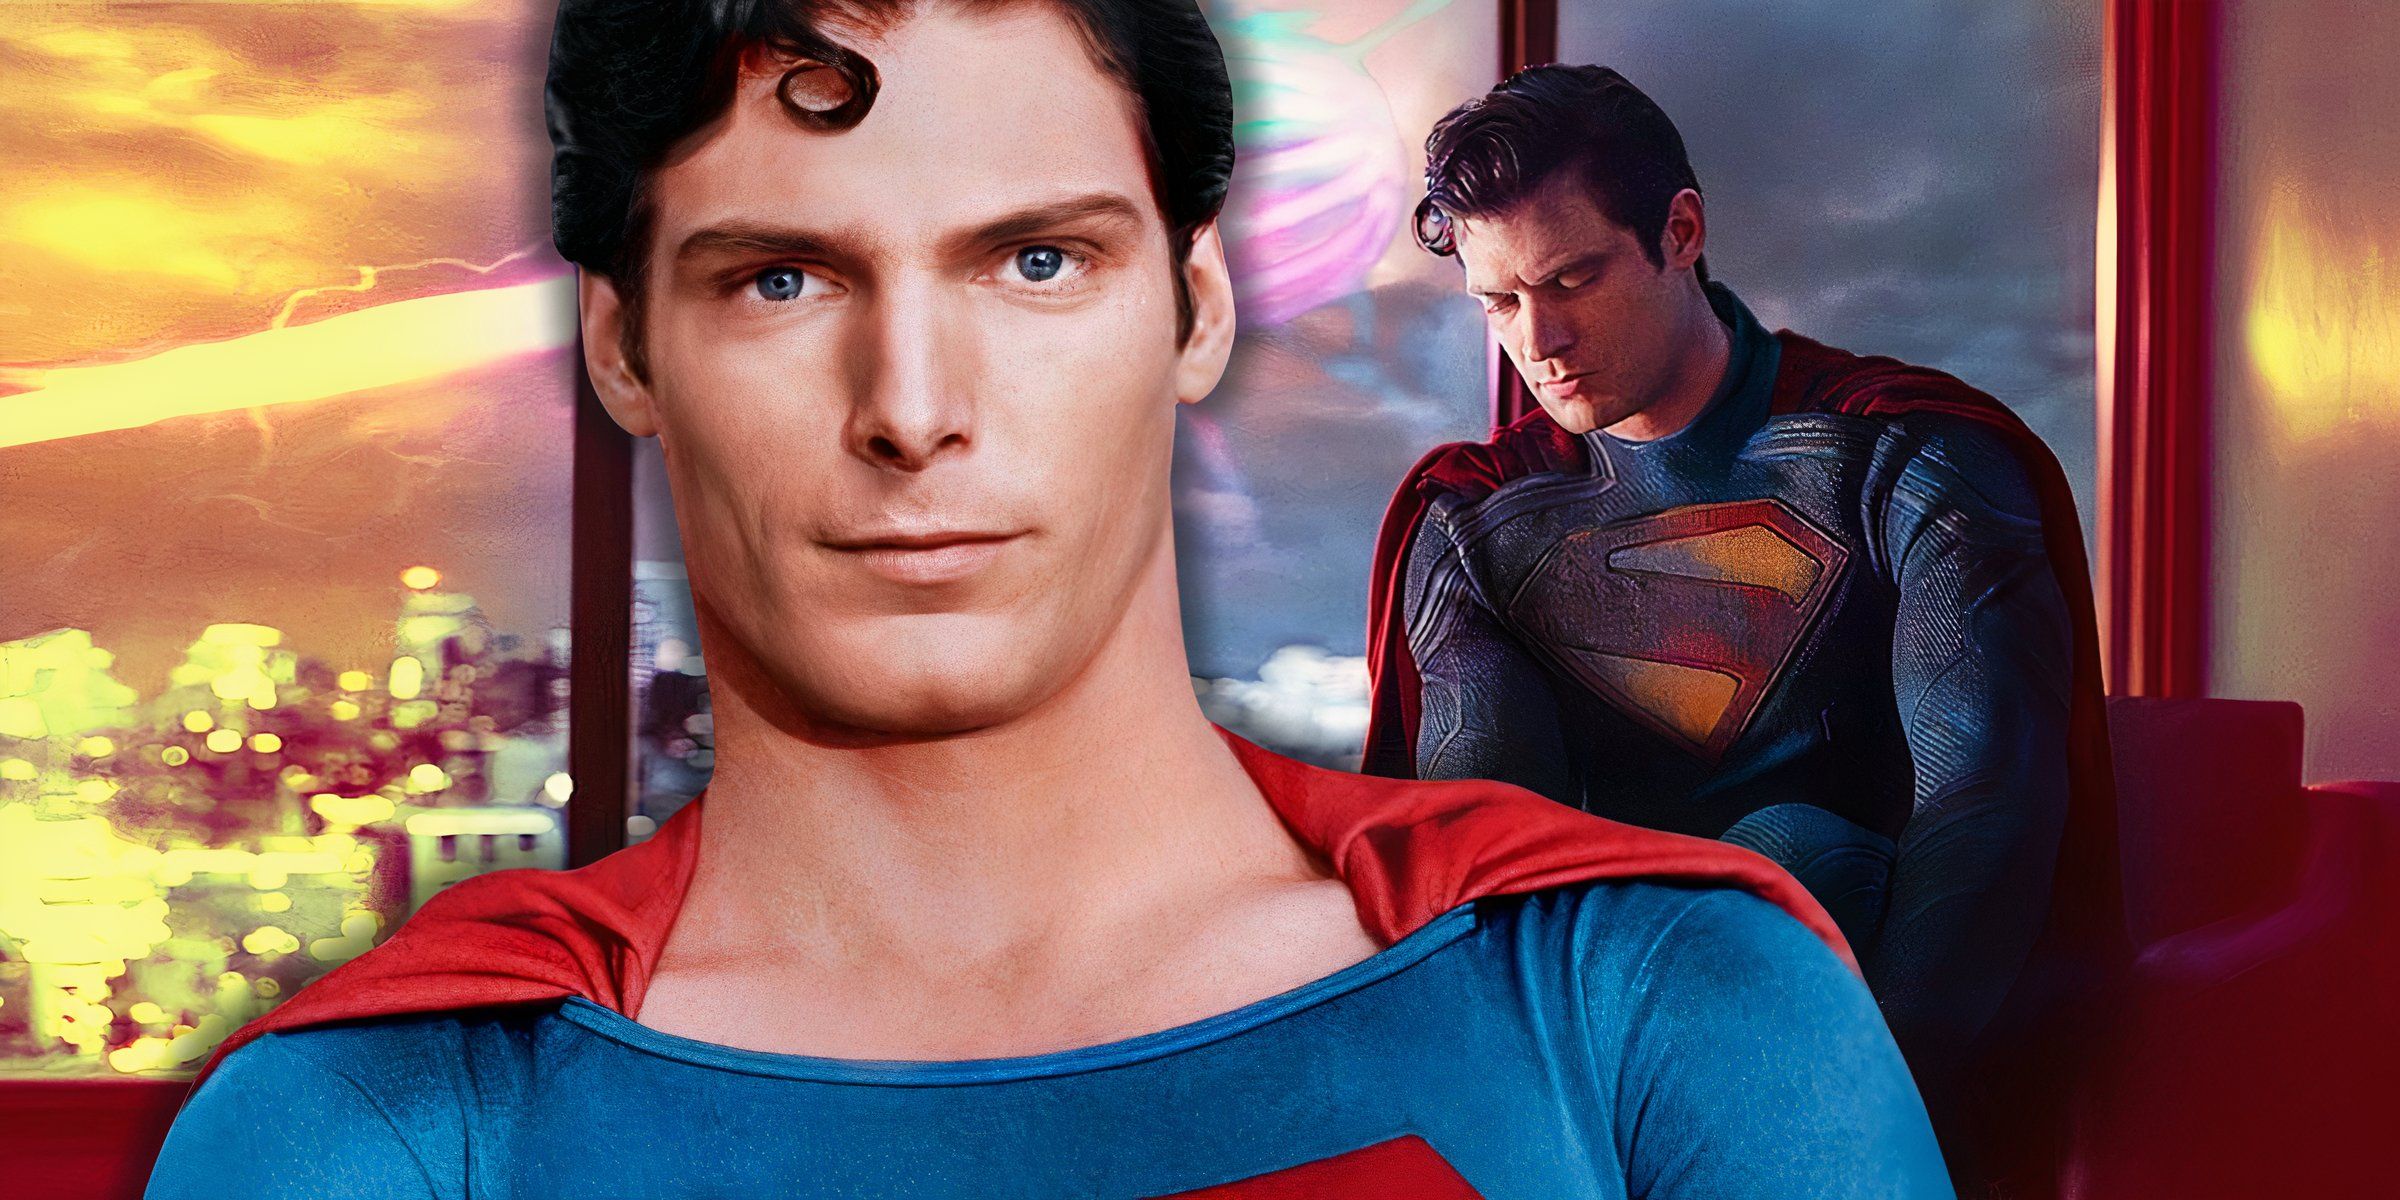 David Corenswet as Superman with Christopher Reeves